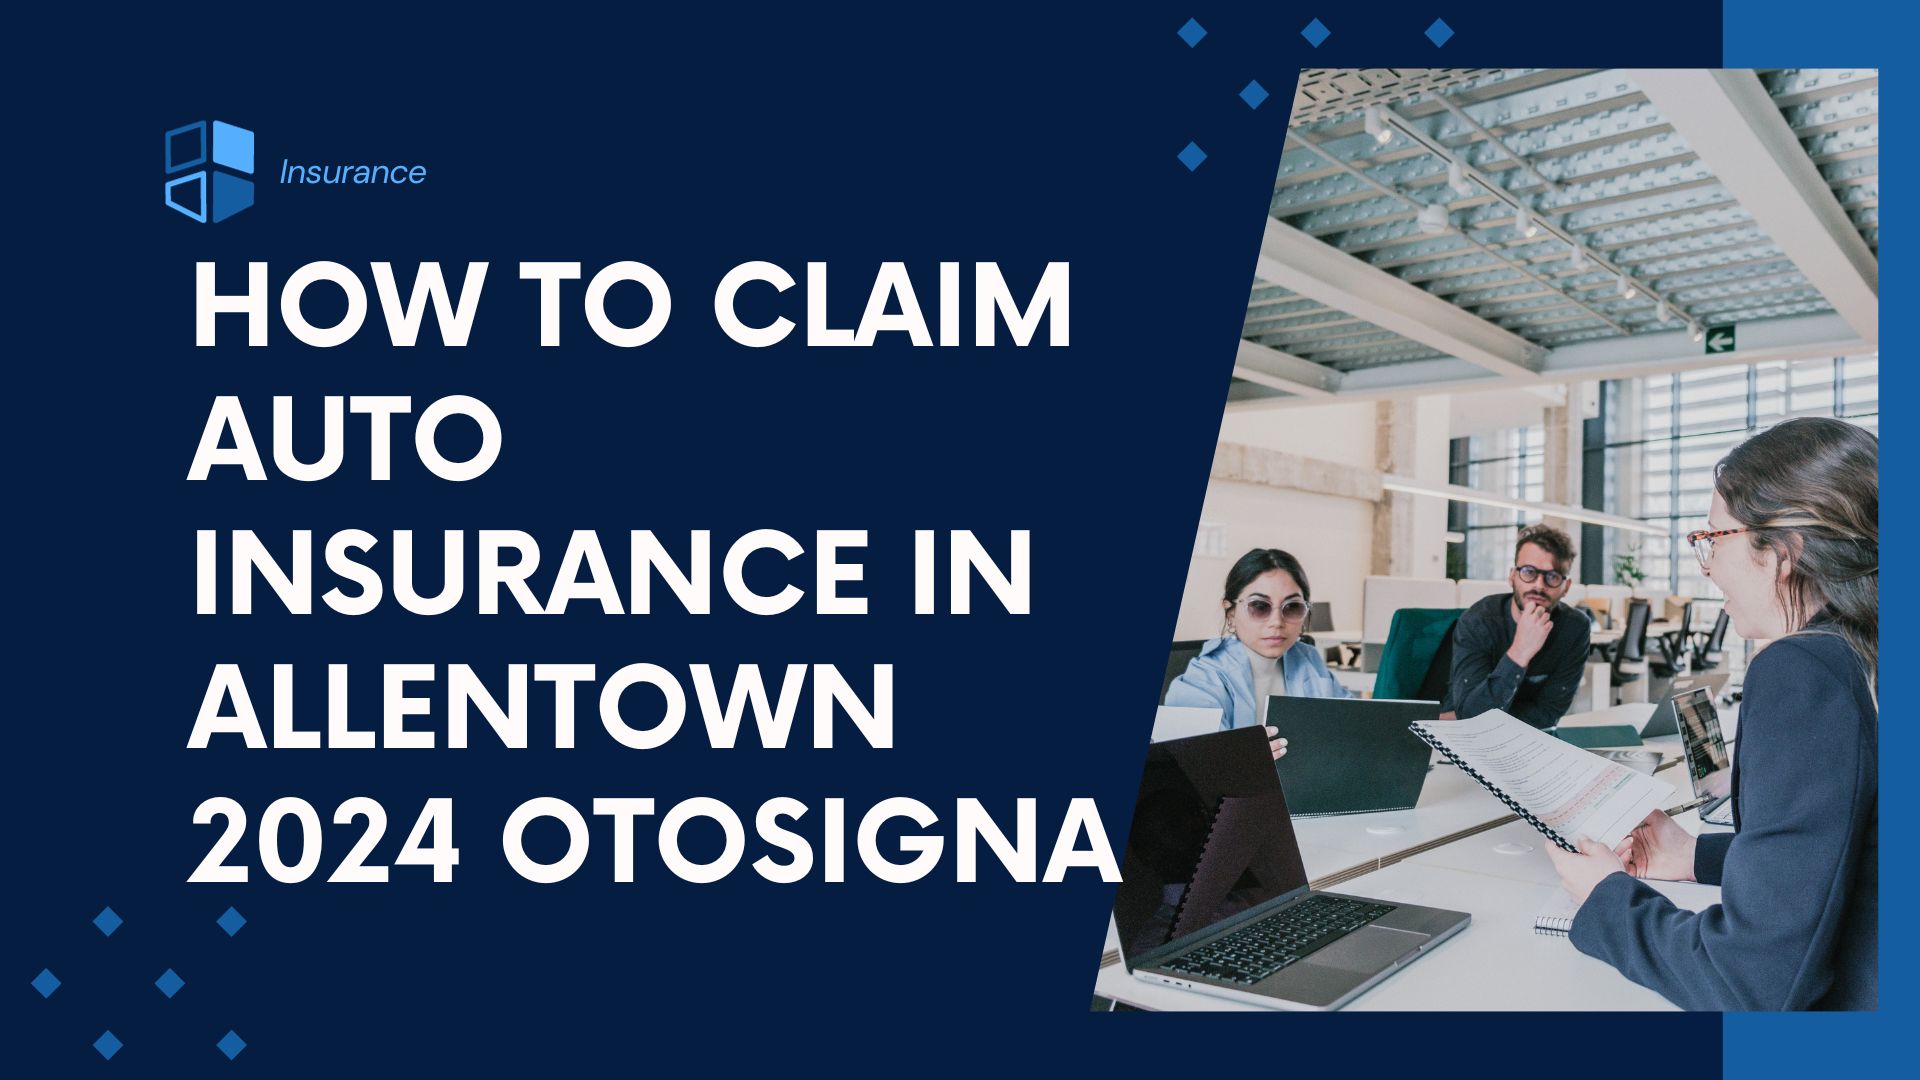 You are currently viewing How to Claim Auto Insurance in Allentown 2024 best Otosigna